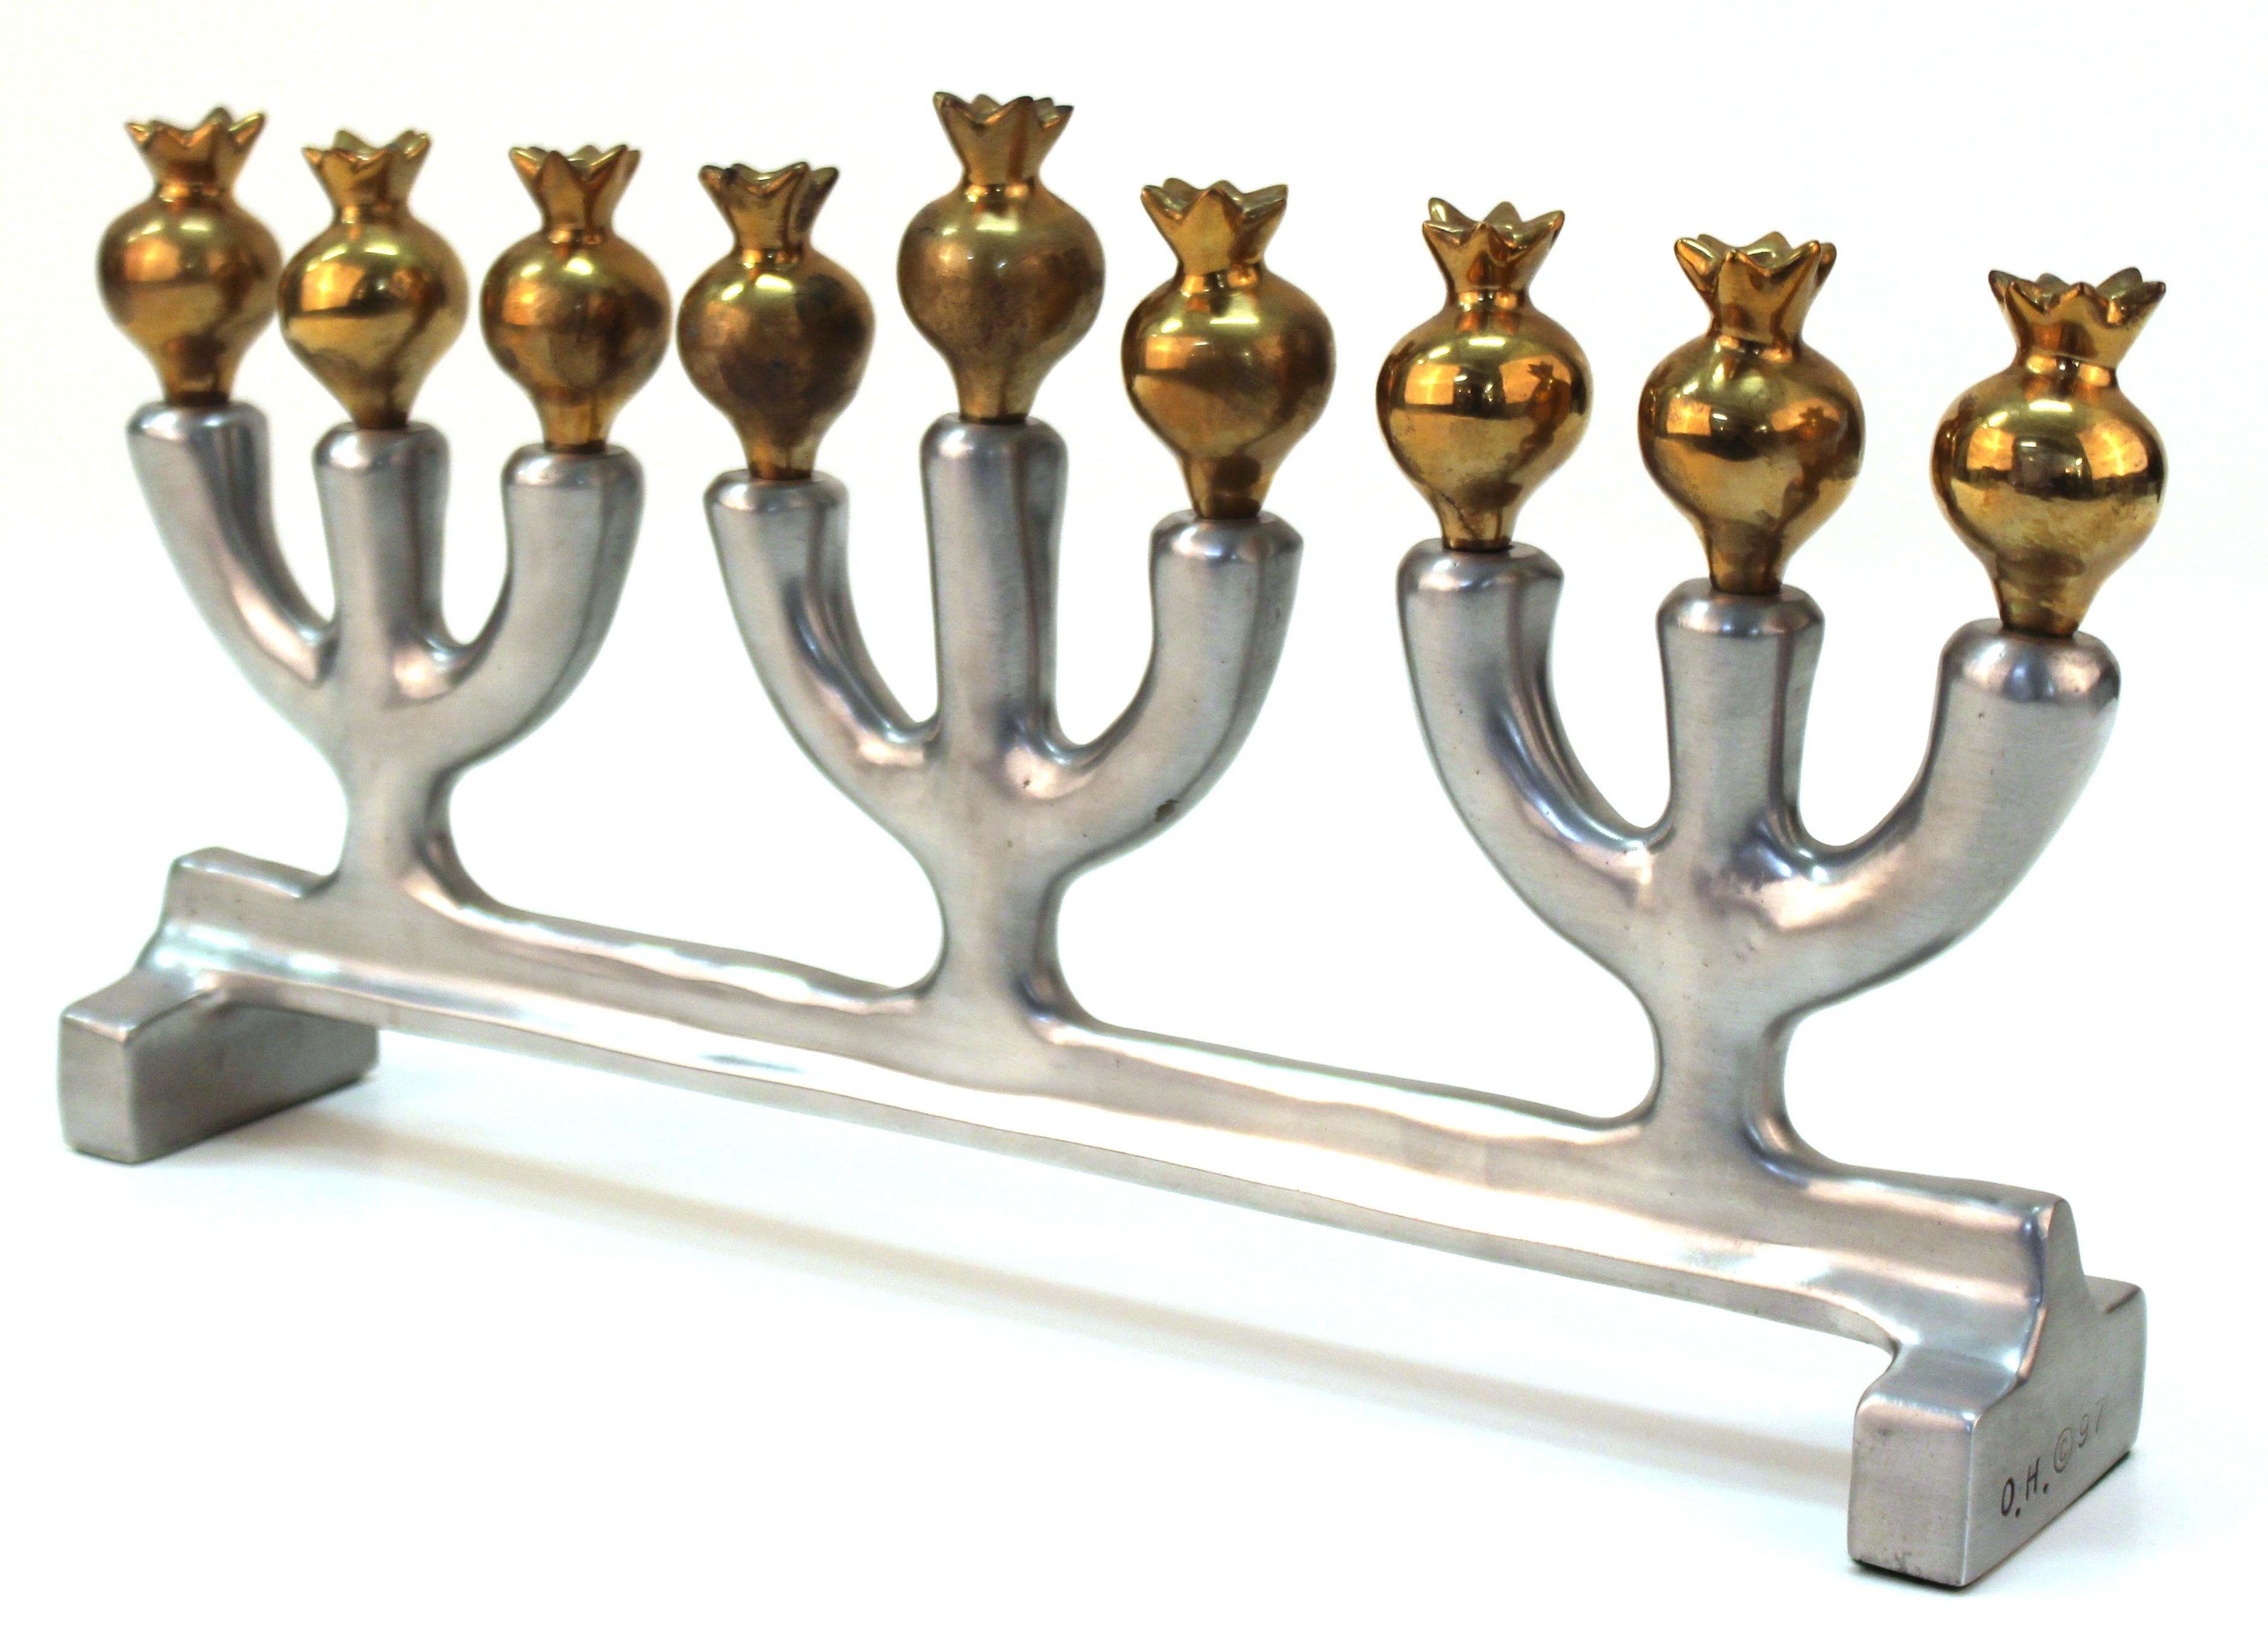 Modern bronze and cast aluminium menorah by Oded Halahmy, titled 'Peace Shalom Salaam (Study)', created in 1997. Marked by the artist and dated on the side. In great vintage condition.